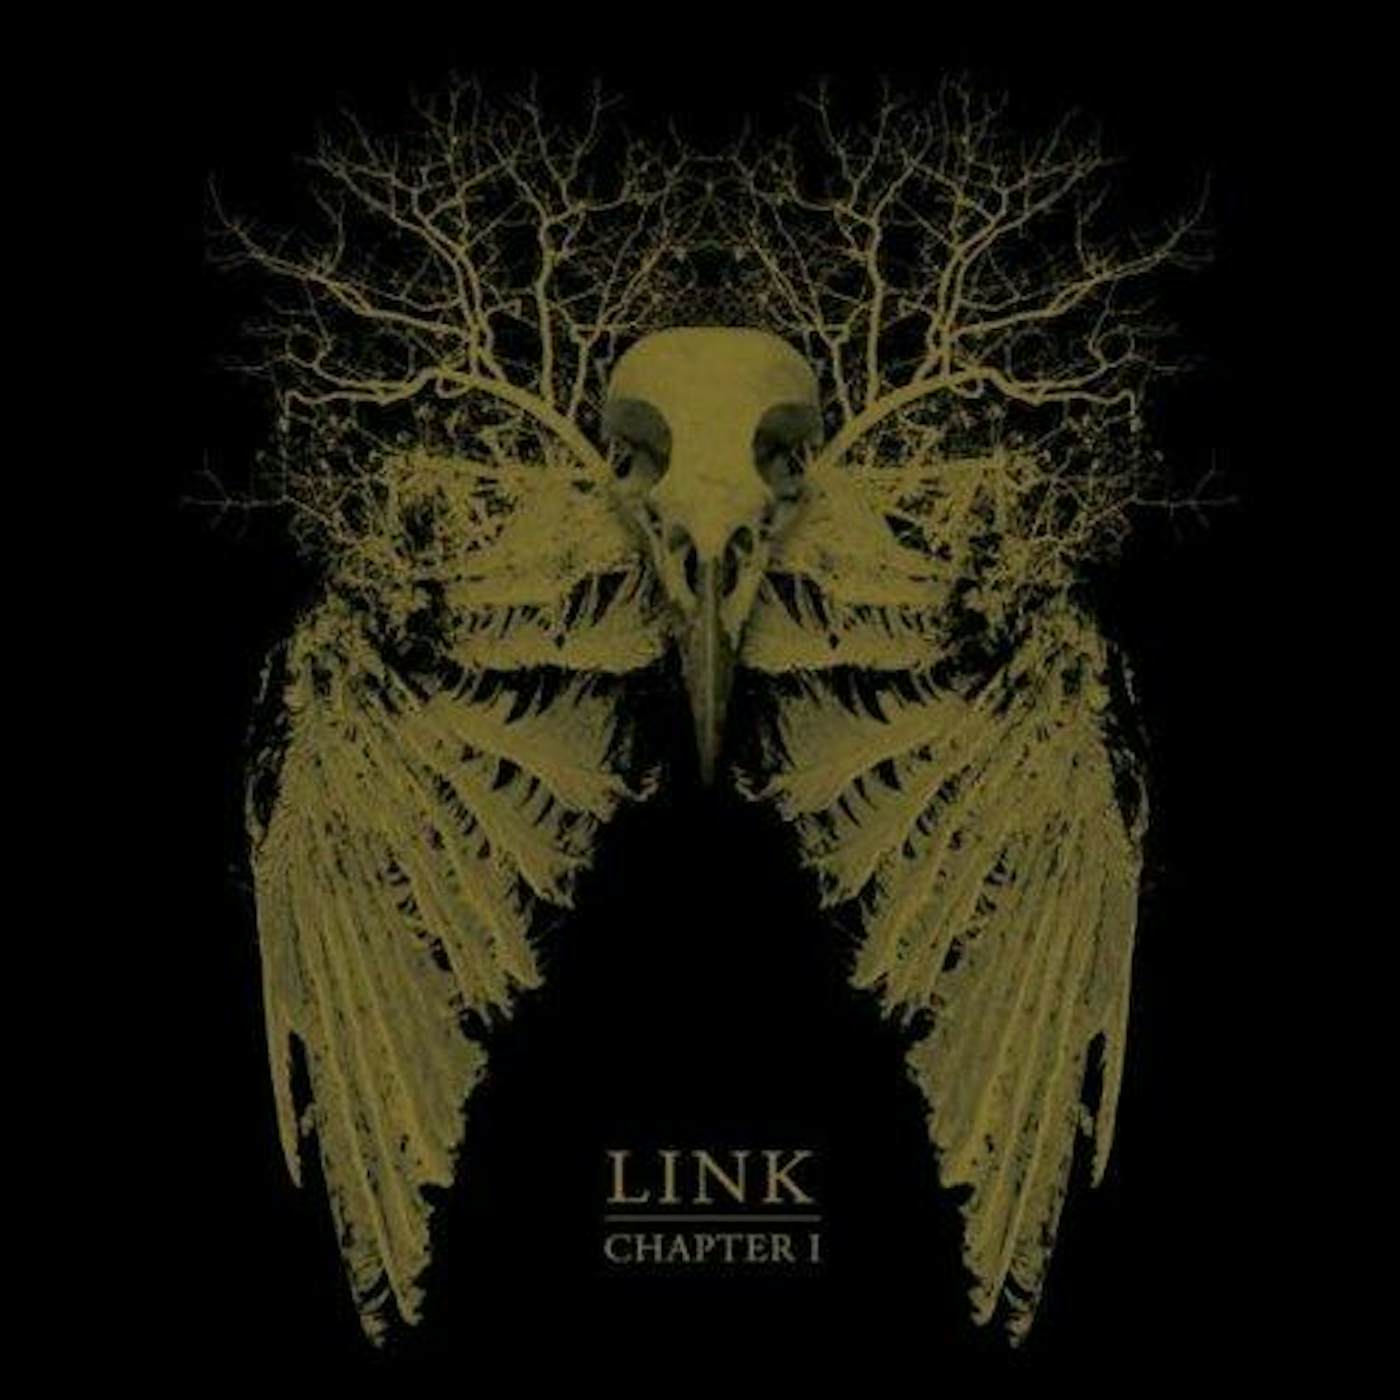 Link ‎– Chapter 1 CD